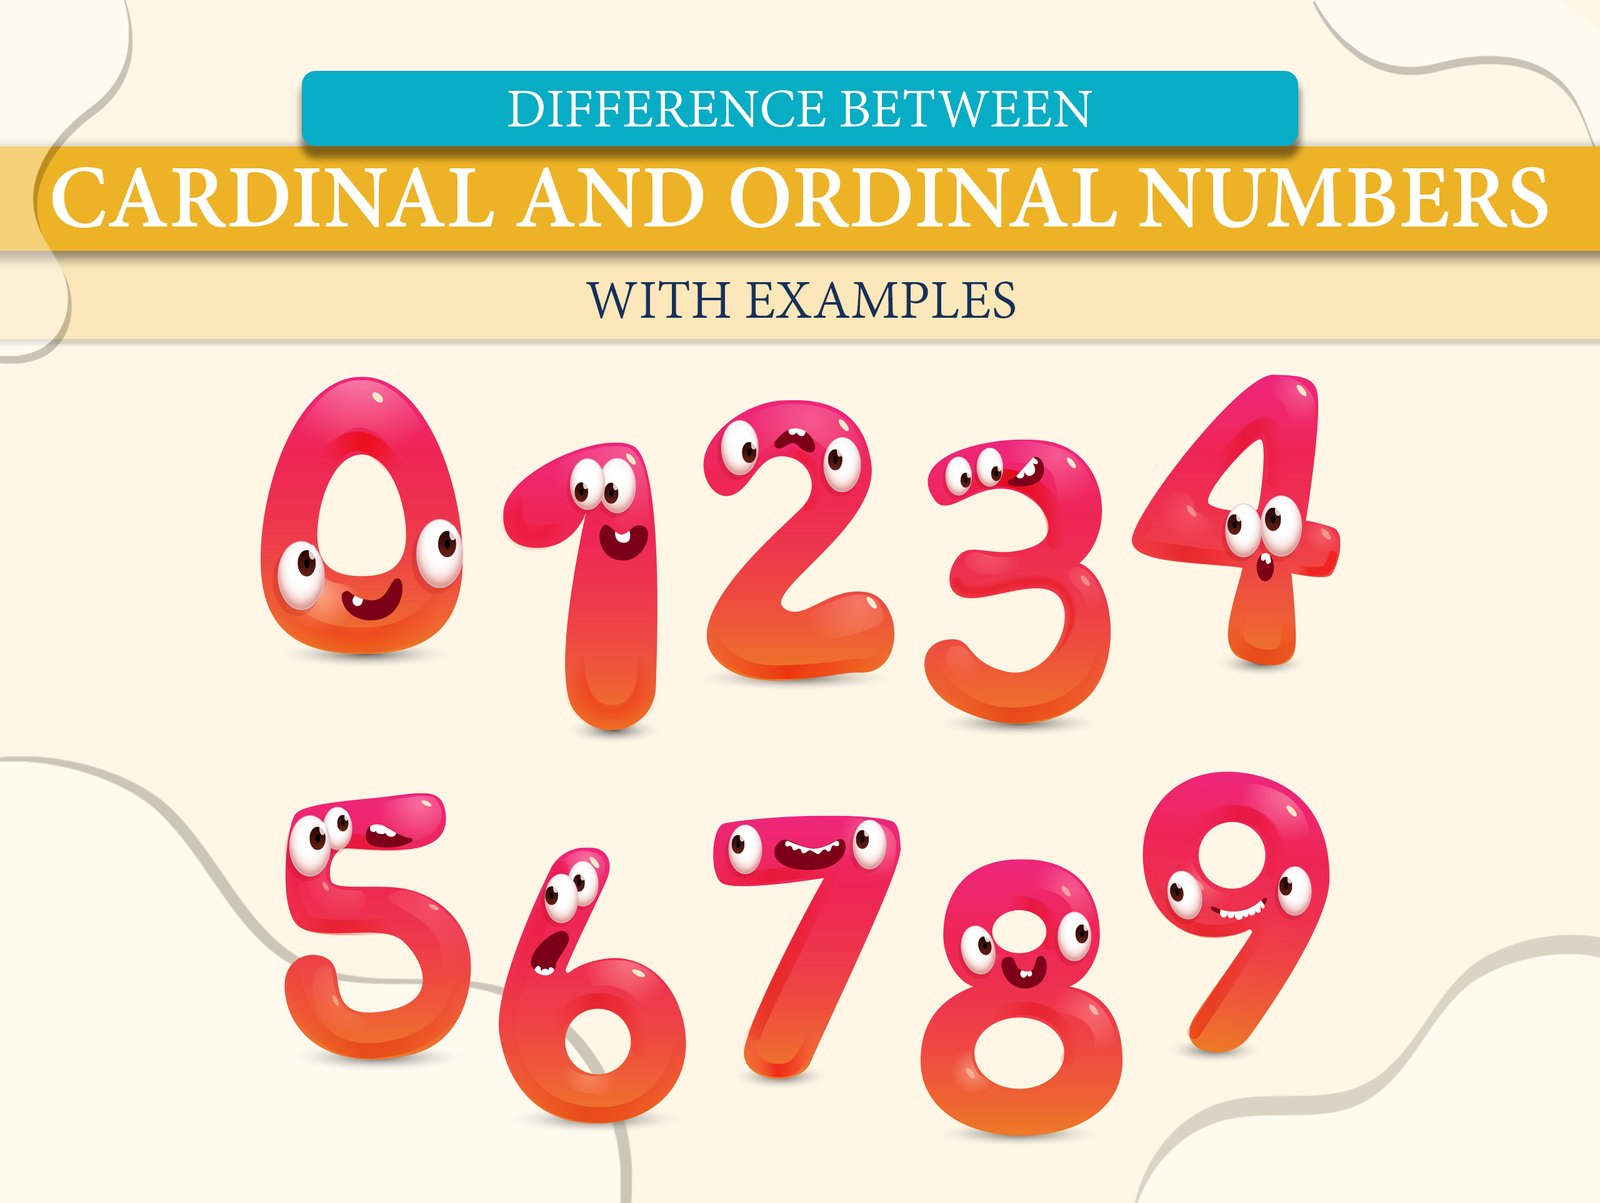 Difference between Cardinal and Ordinal Numbers poster